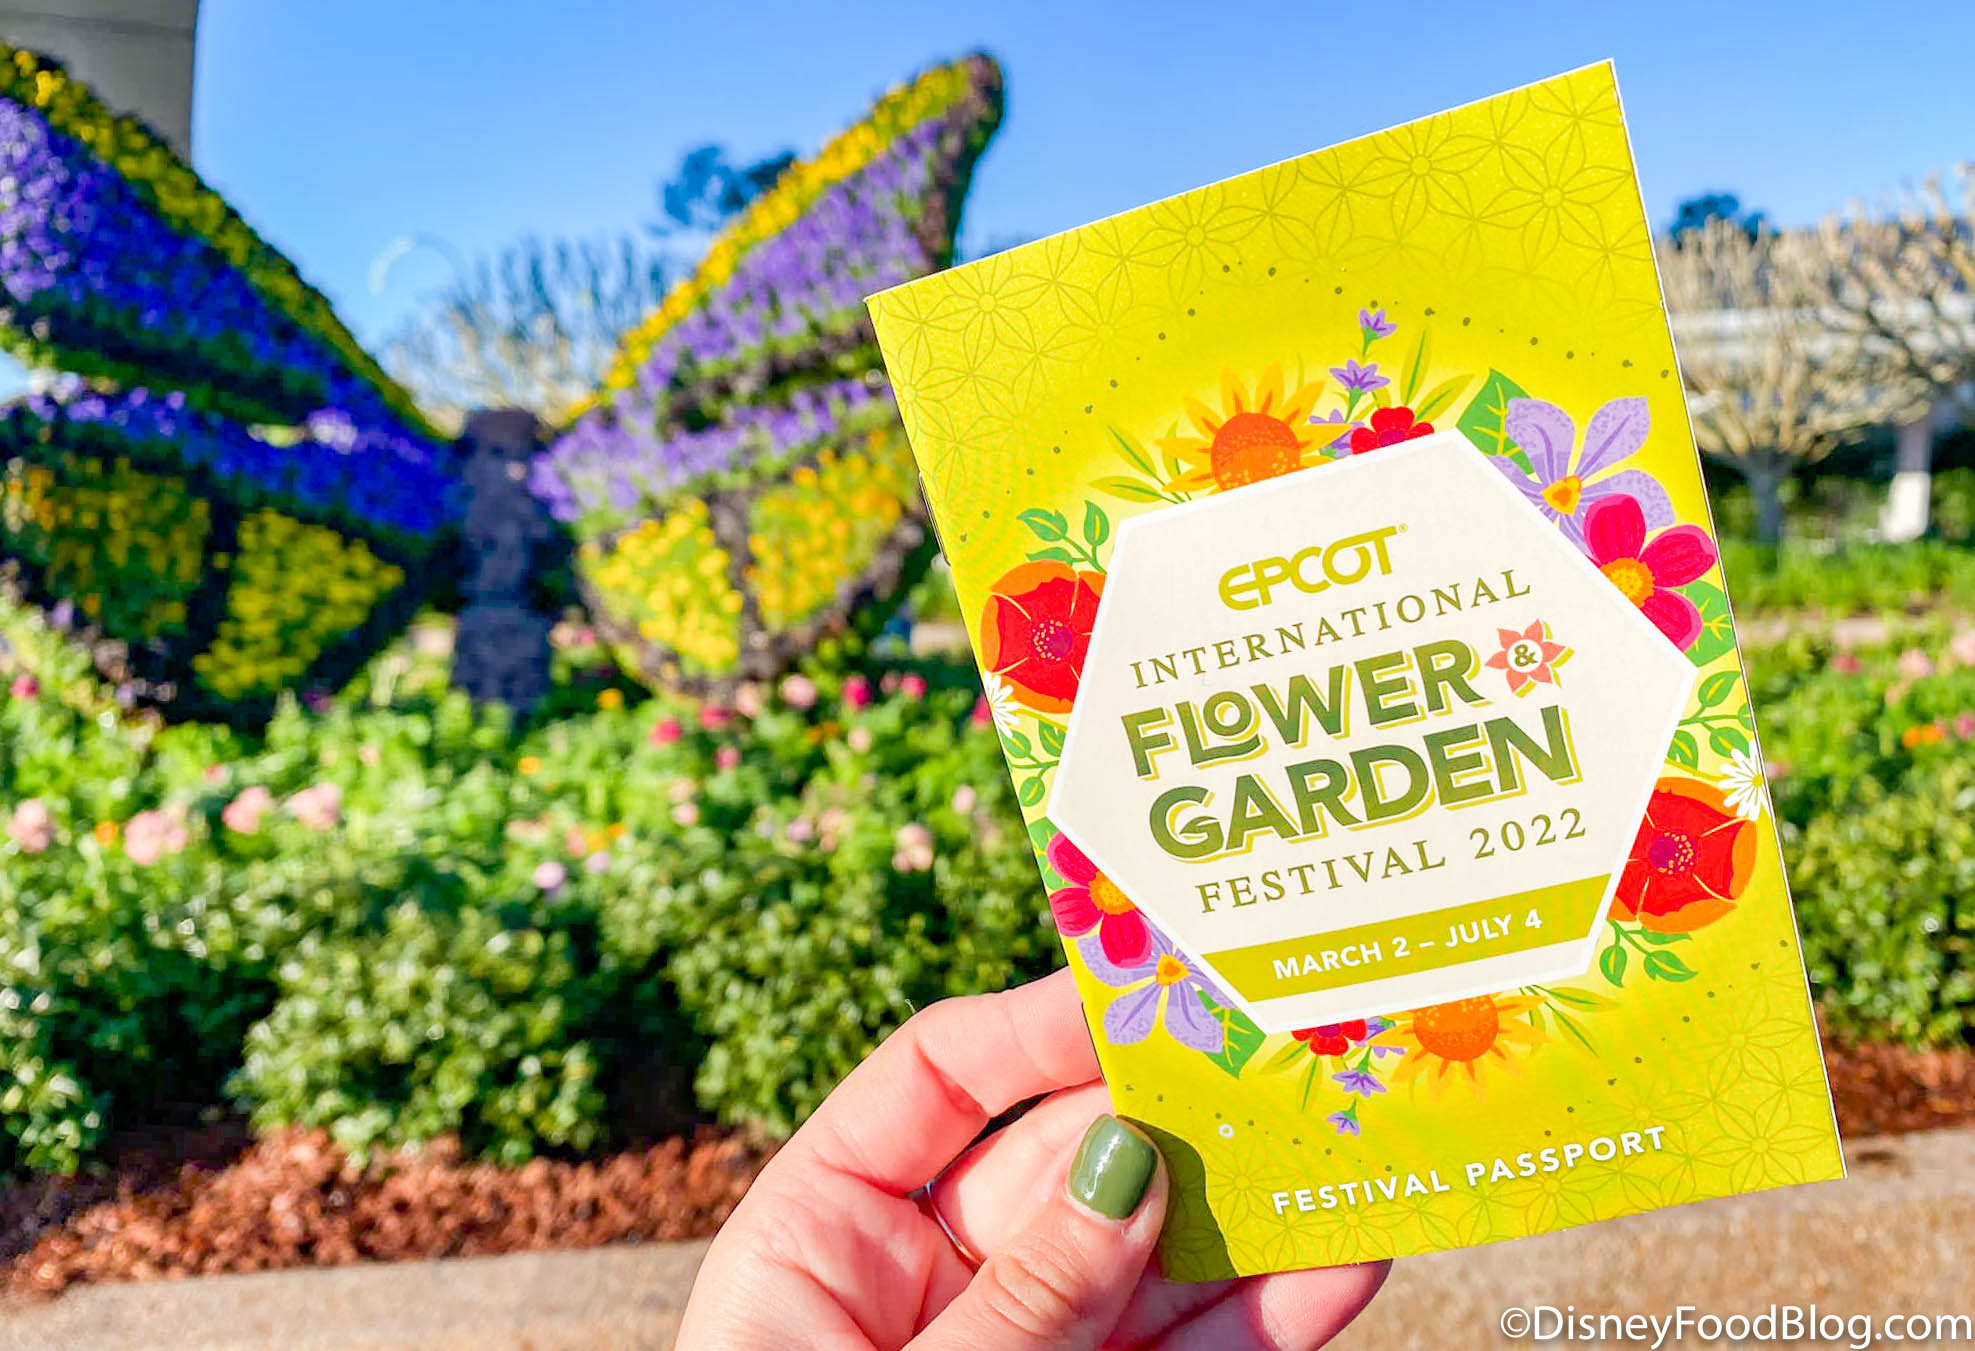 PHOTOS & VIDEOS We’re LIVE From the First Day of EPCOT’s Flower and